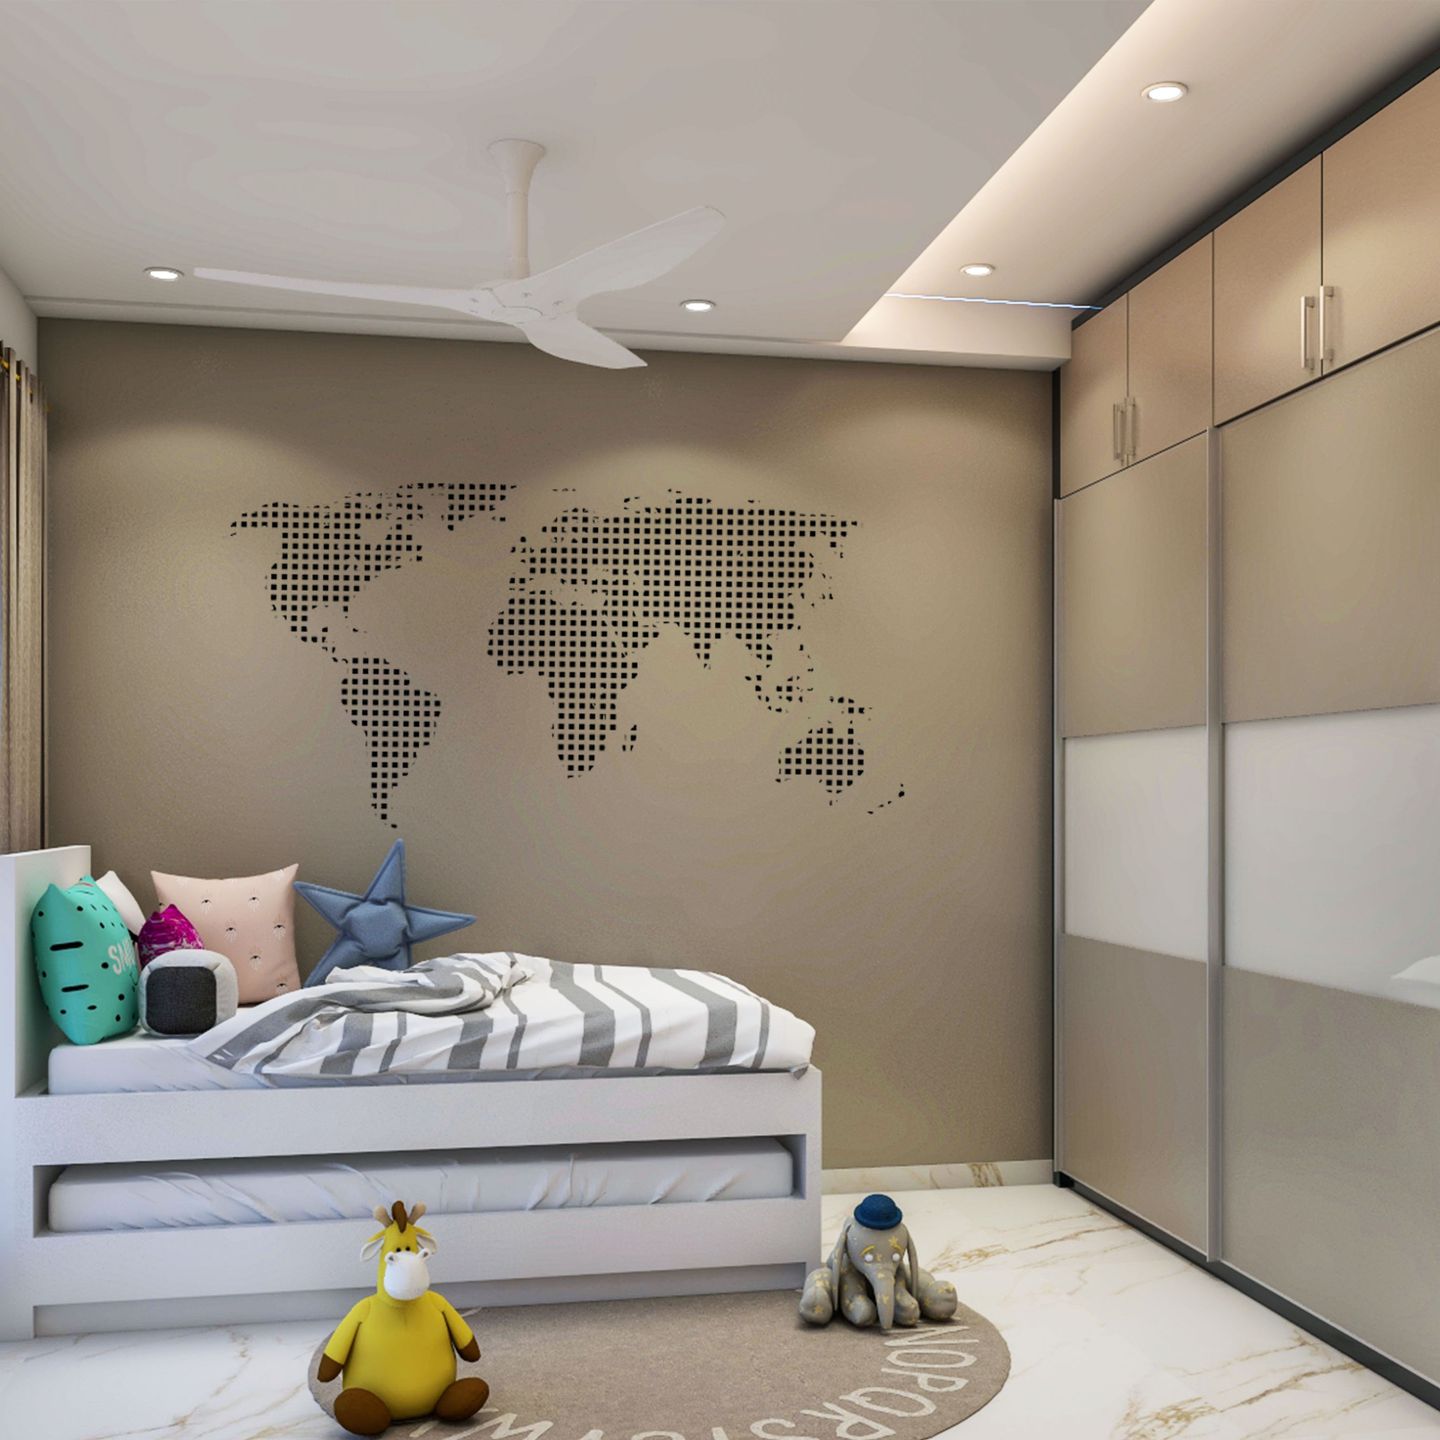 Rustic Light Brown Wall Paint Design For Kids Bedroom With World Map Wall Art - Livspace